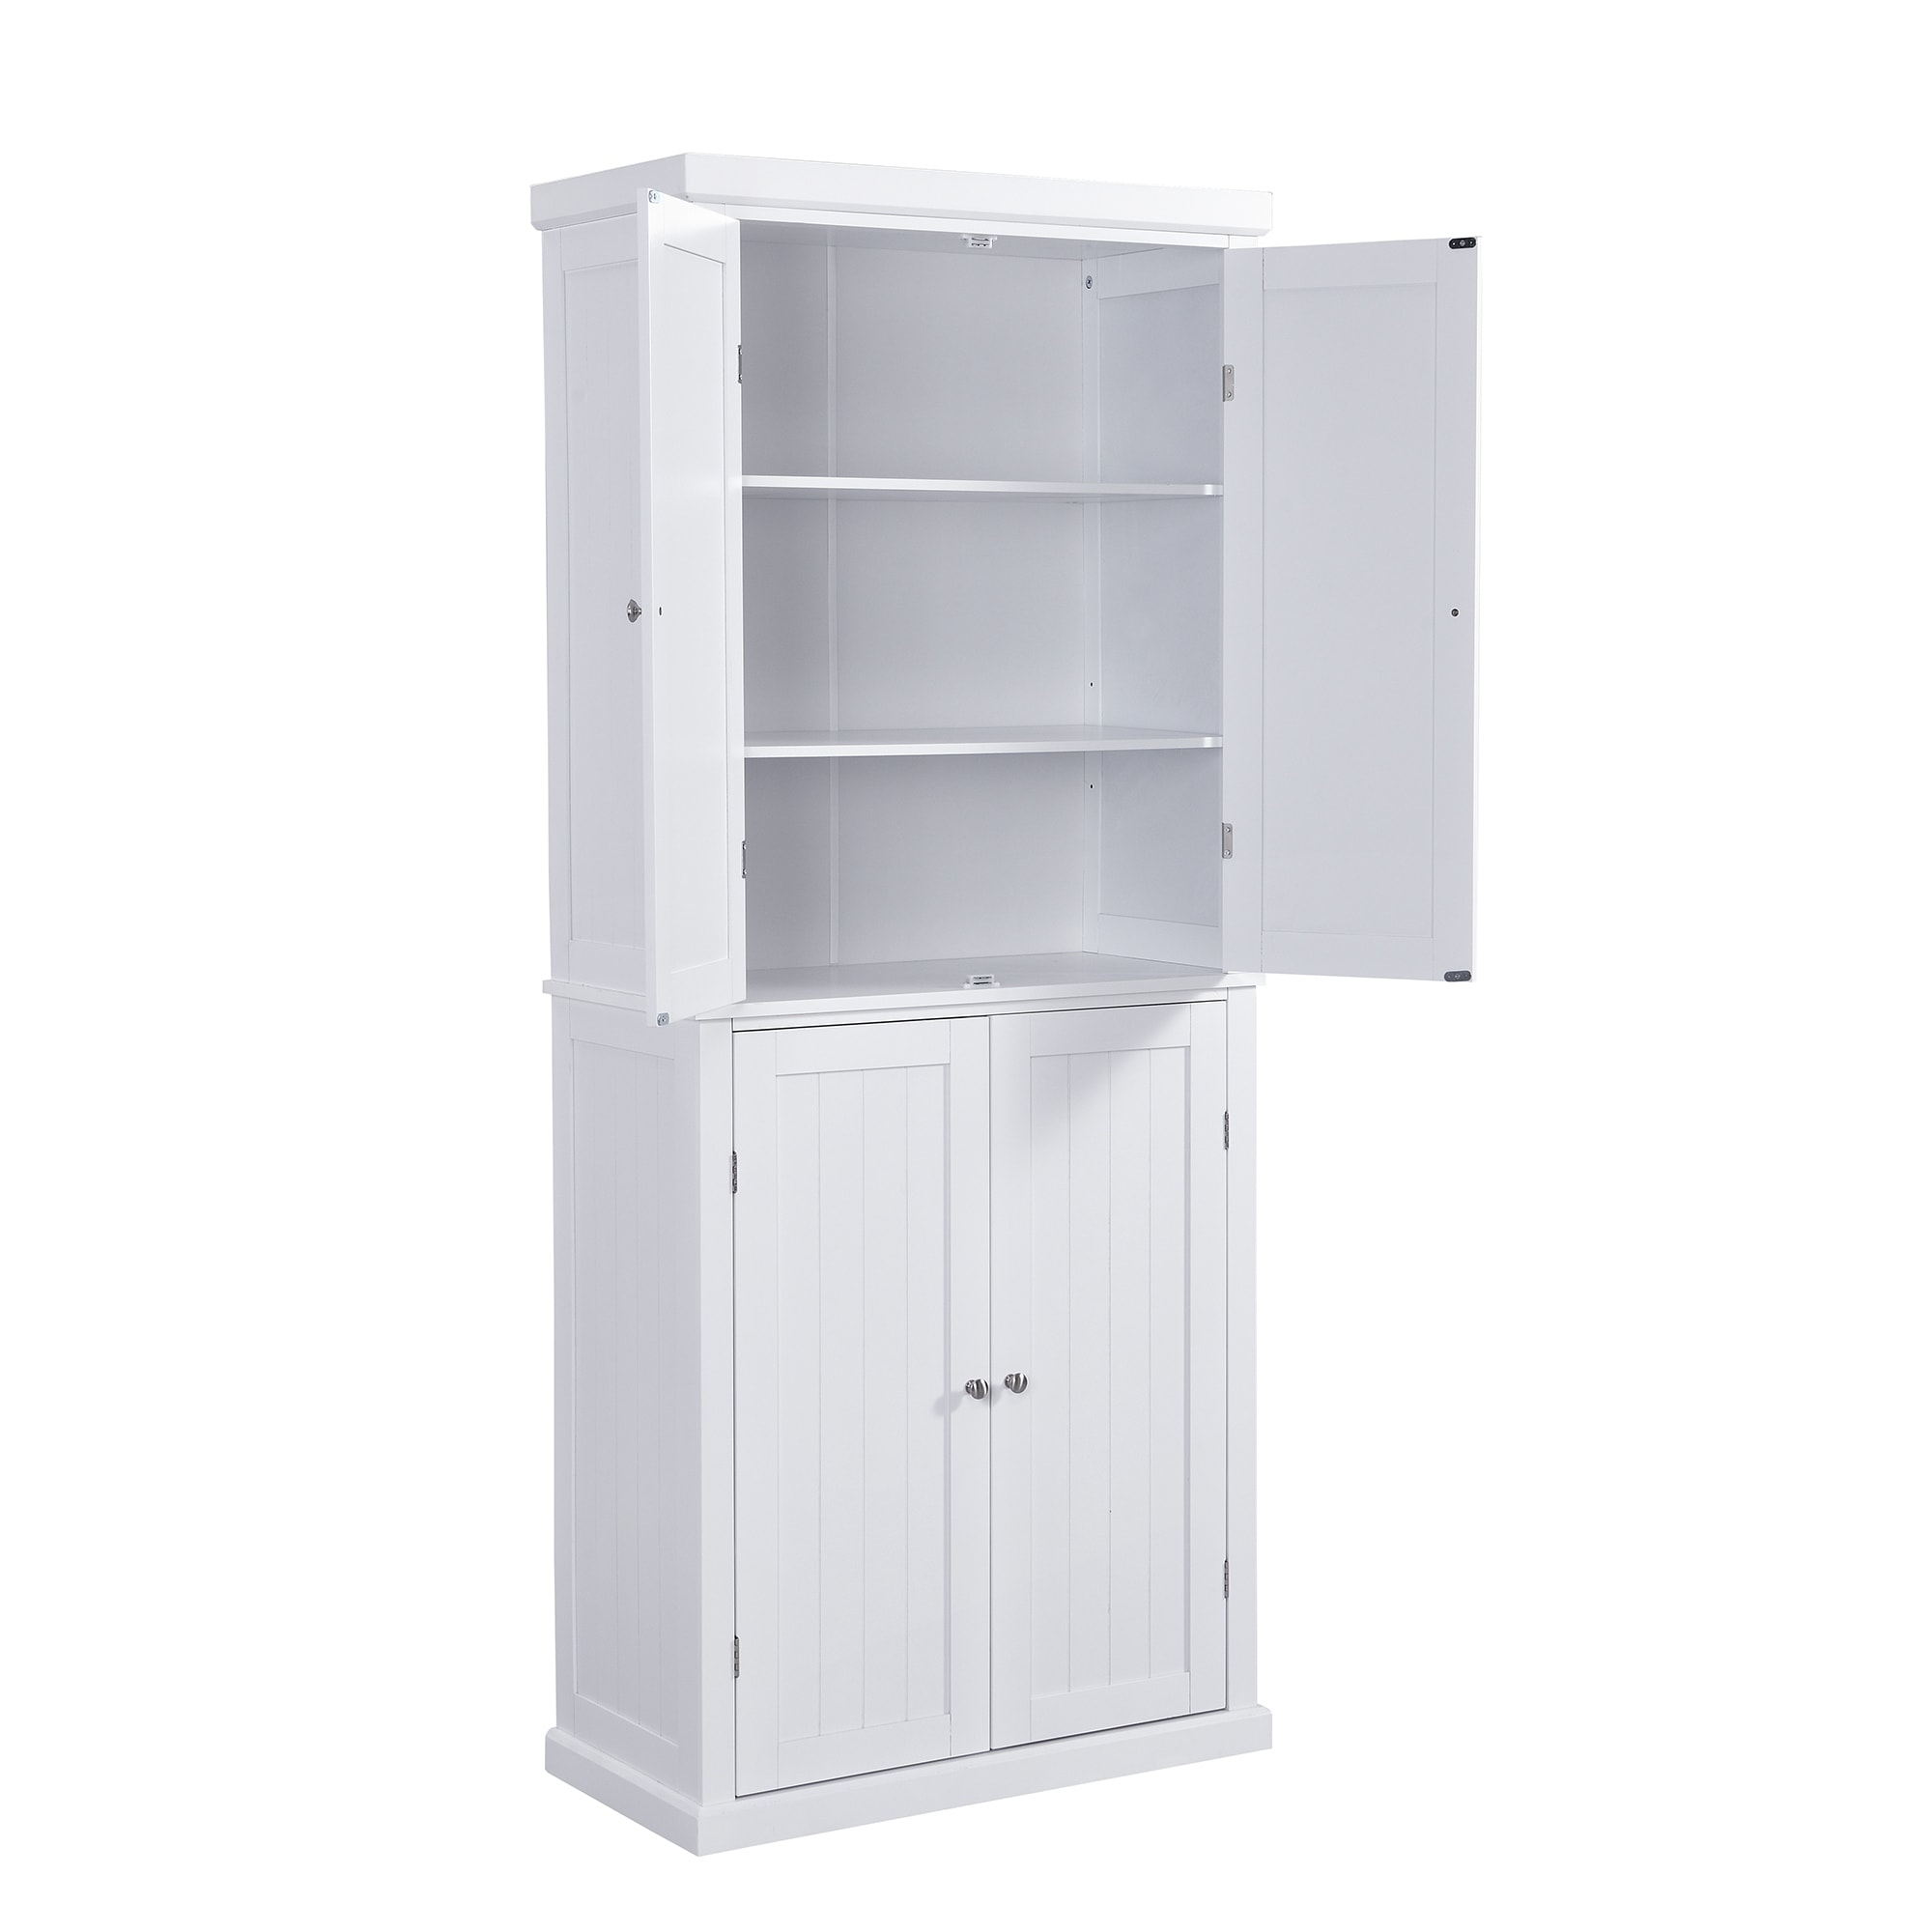 https://ak1.ostkcdn.com/images/products/is/images/direct/058ad536804fa5fb0311ffadd7b10e3f9fb71665/Freestanding-Tall-Kitchen-Pantry%2C-72.4%22-Minimalist-Kitchen-Storage-Cabinet-Organizer-with-4-Doors-and-Adjustable-Shelves%2C-White.jpg